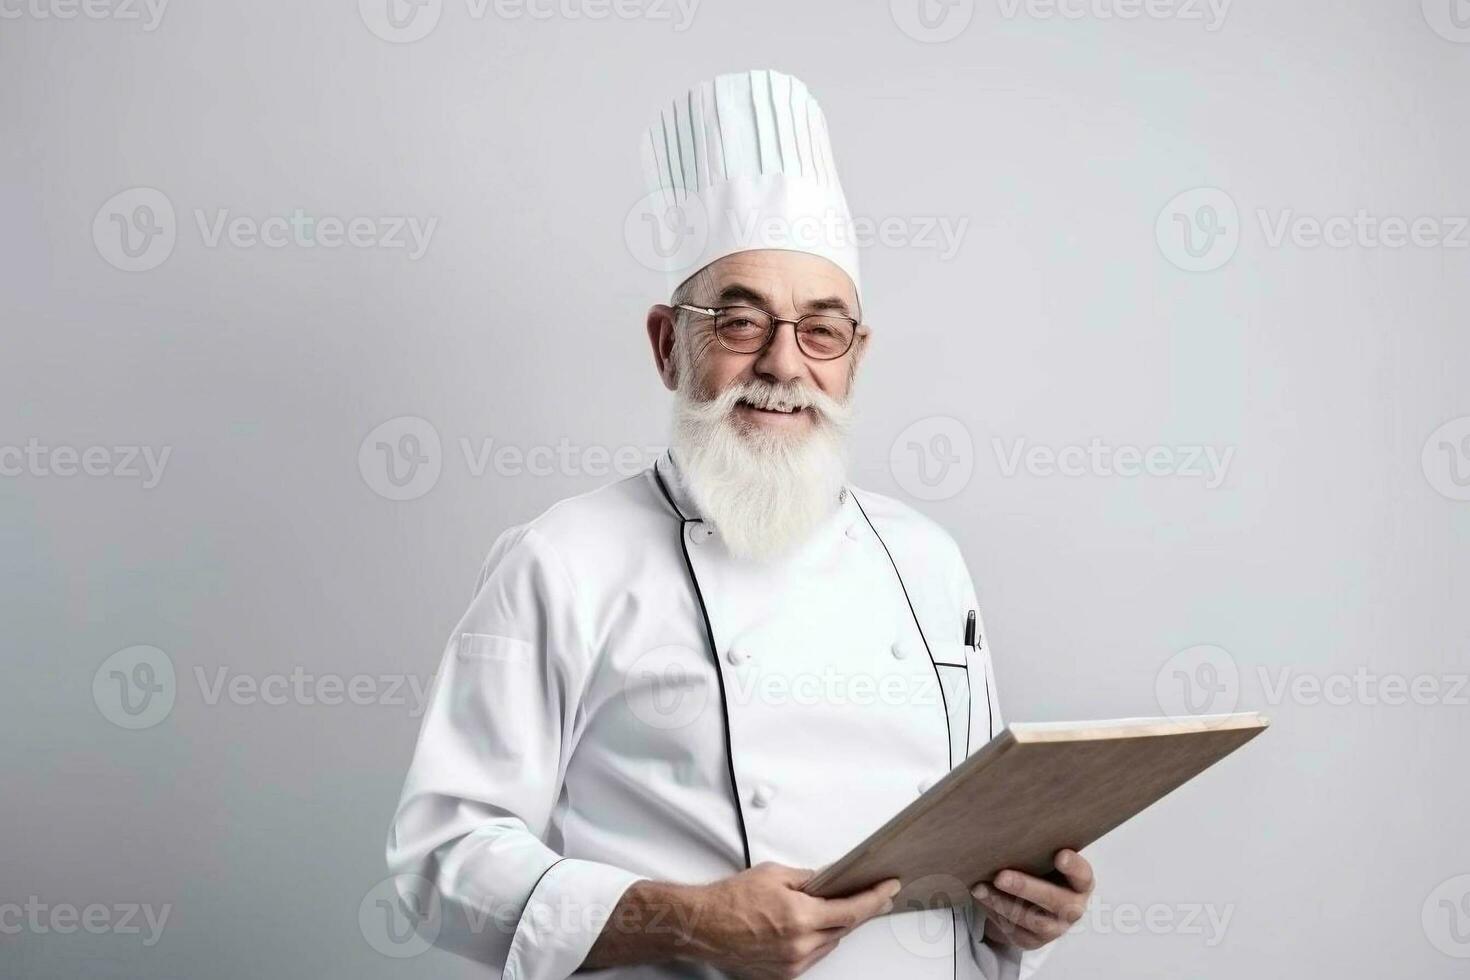 A man chef with a beard and mustache in a white uniform greets customers. White background. photo